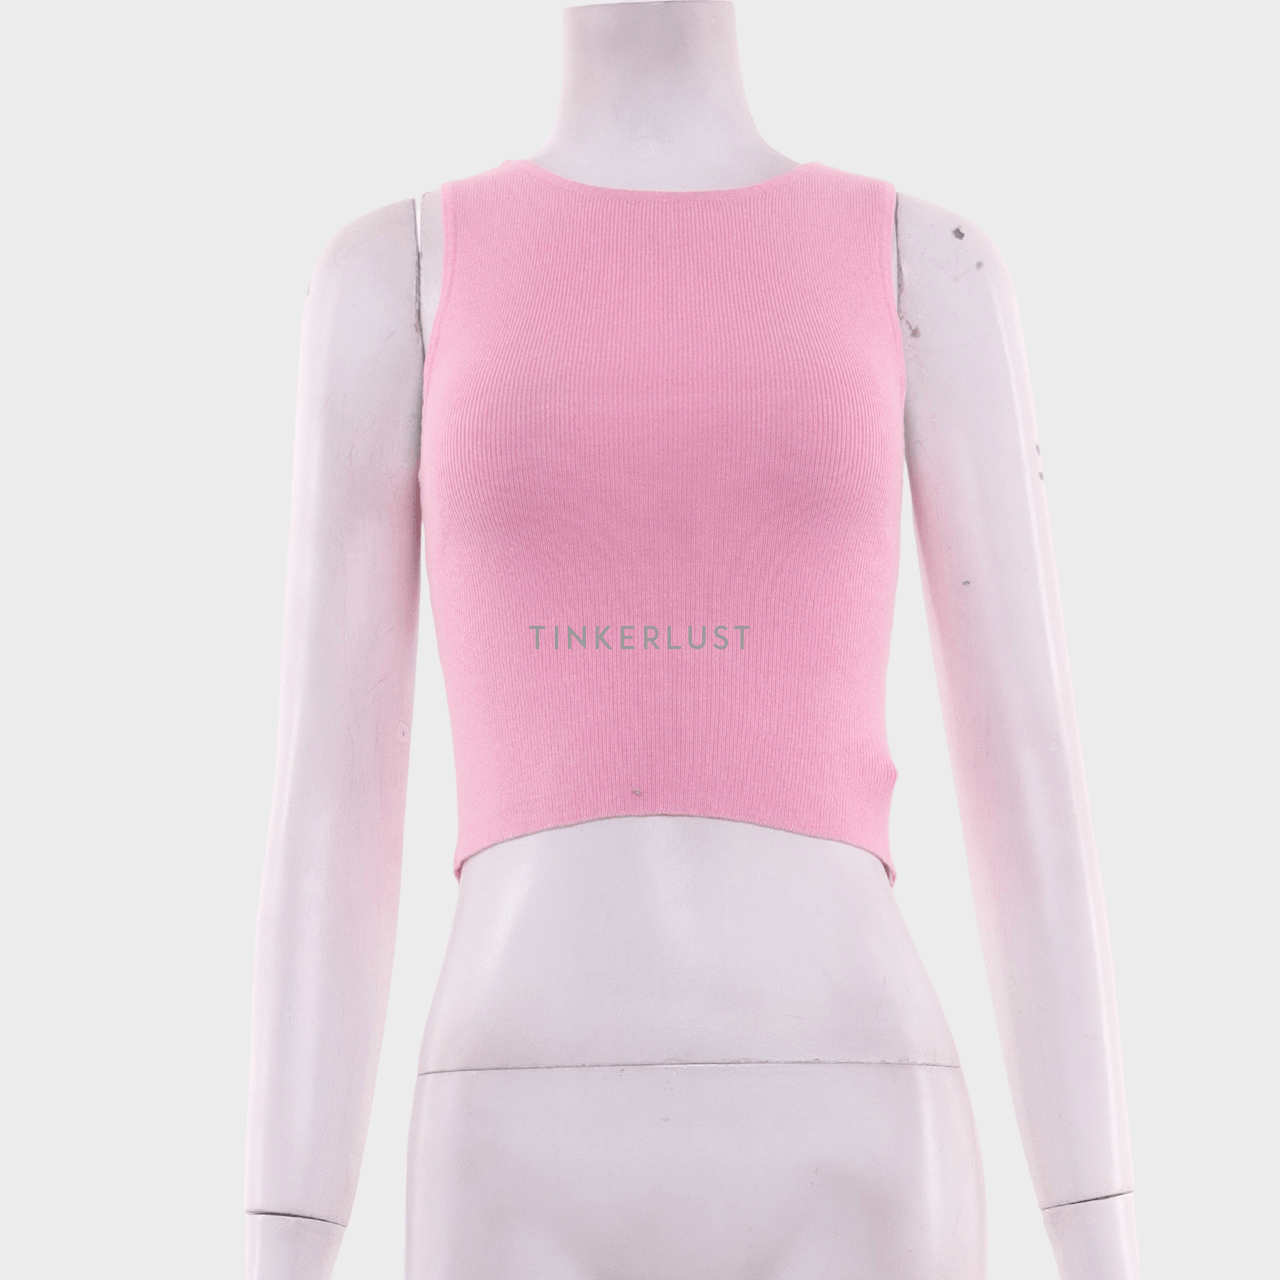 H&M Pink Back Cut Out Sleeveless